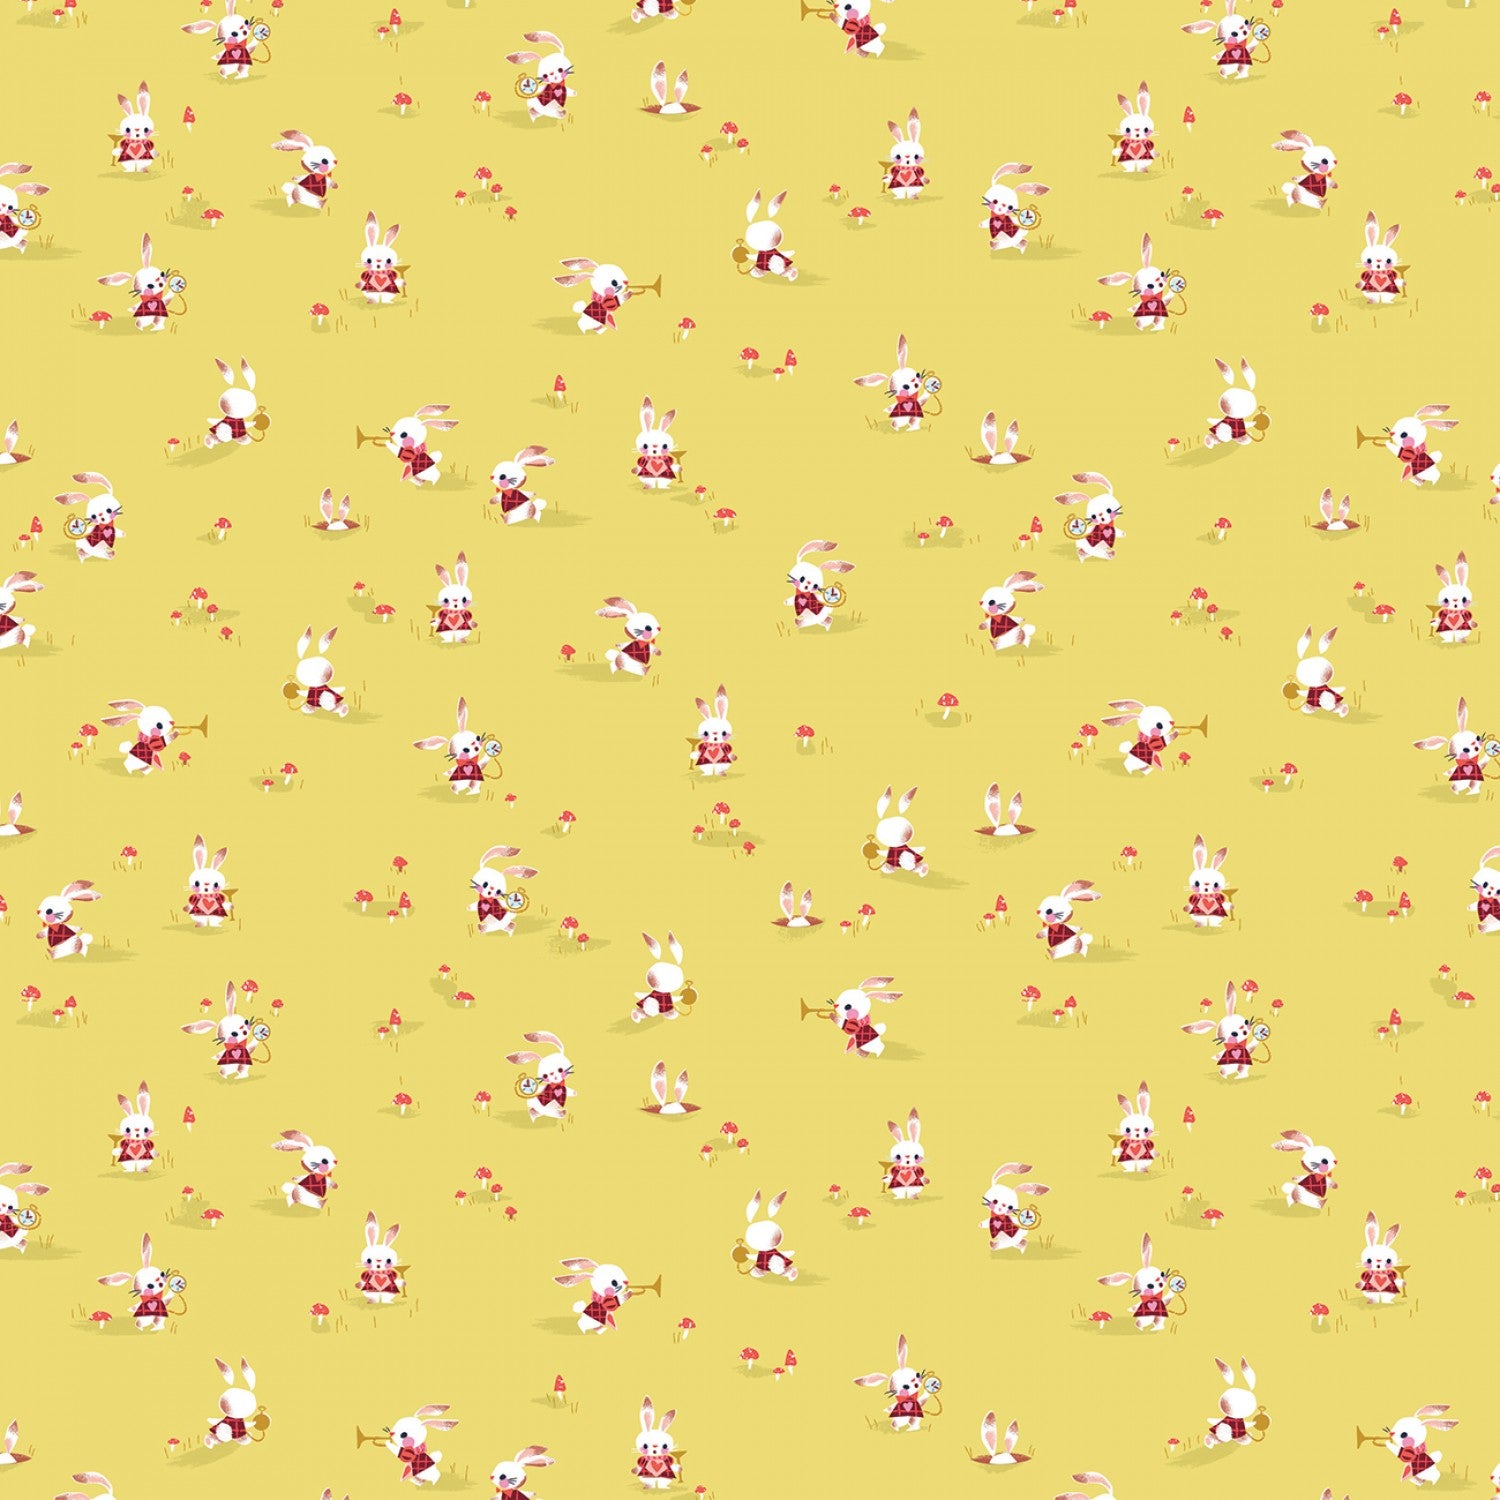 Manufacturer: Riley Blake Designs Designer: Jill Howarth Collection: Down the Rabbit Hole Print Name: Chase in Yellow Material: 100% Cotton Weight: Quilting SKU: C12944R-YELLOW Width: 44 inches